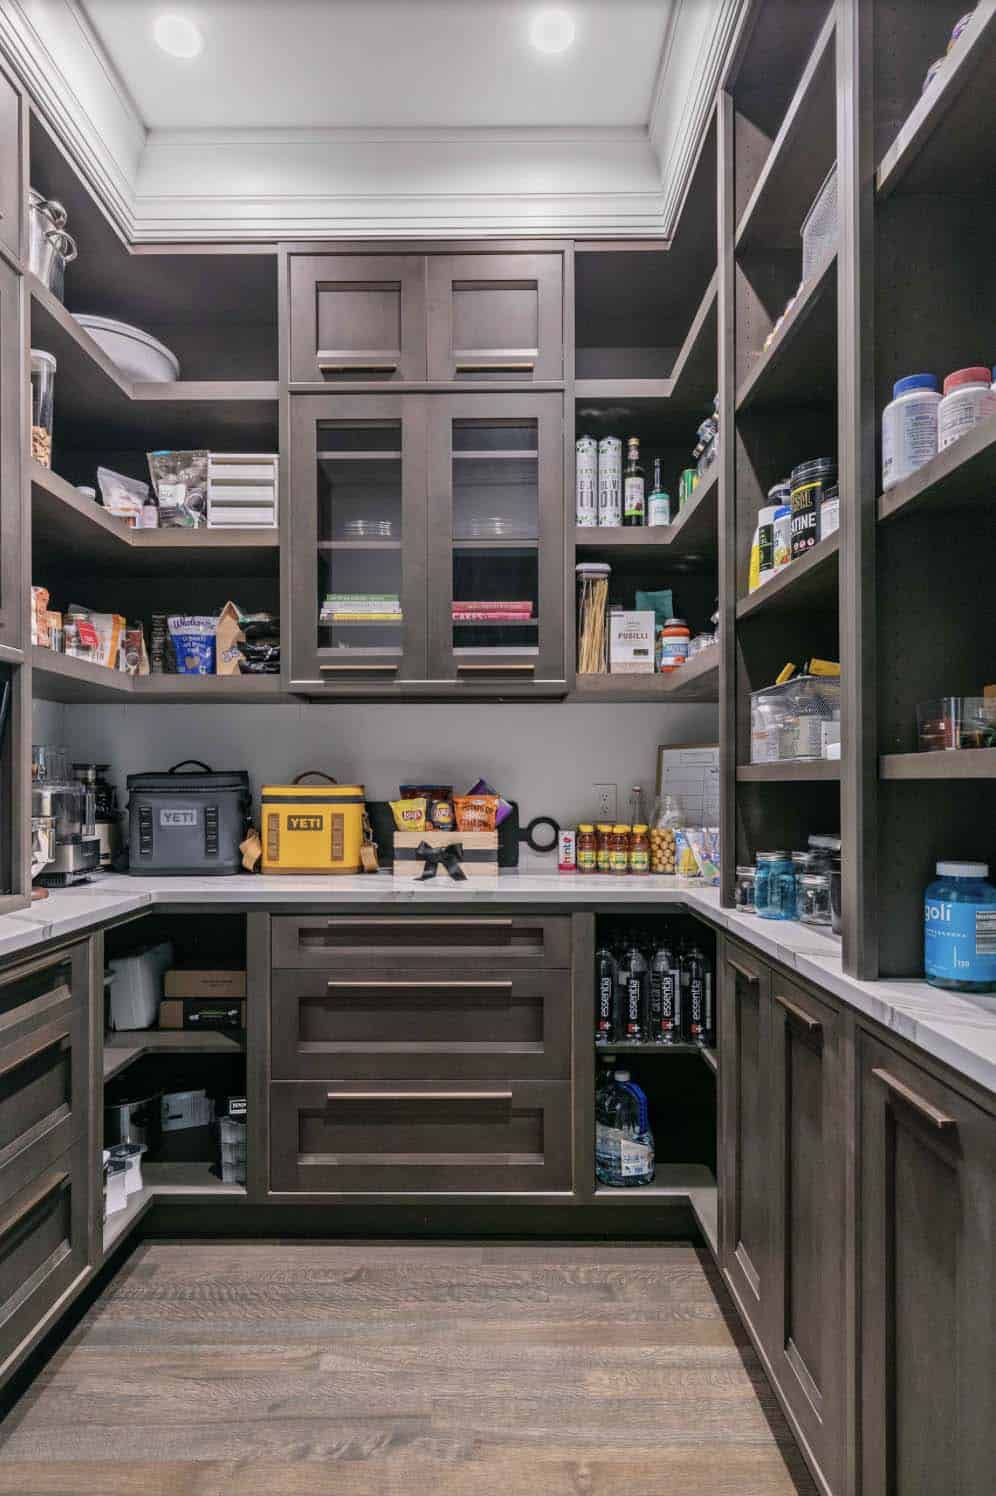 transitional style kitchen walk-in pantry